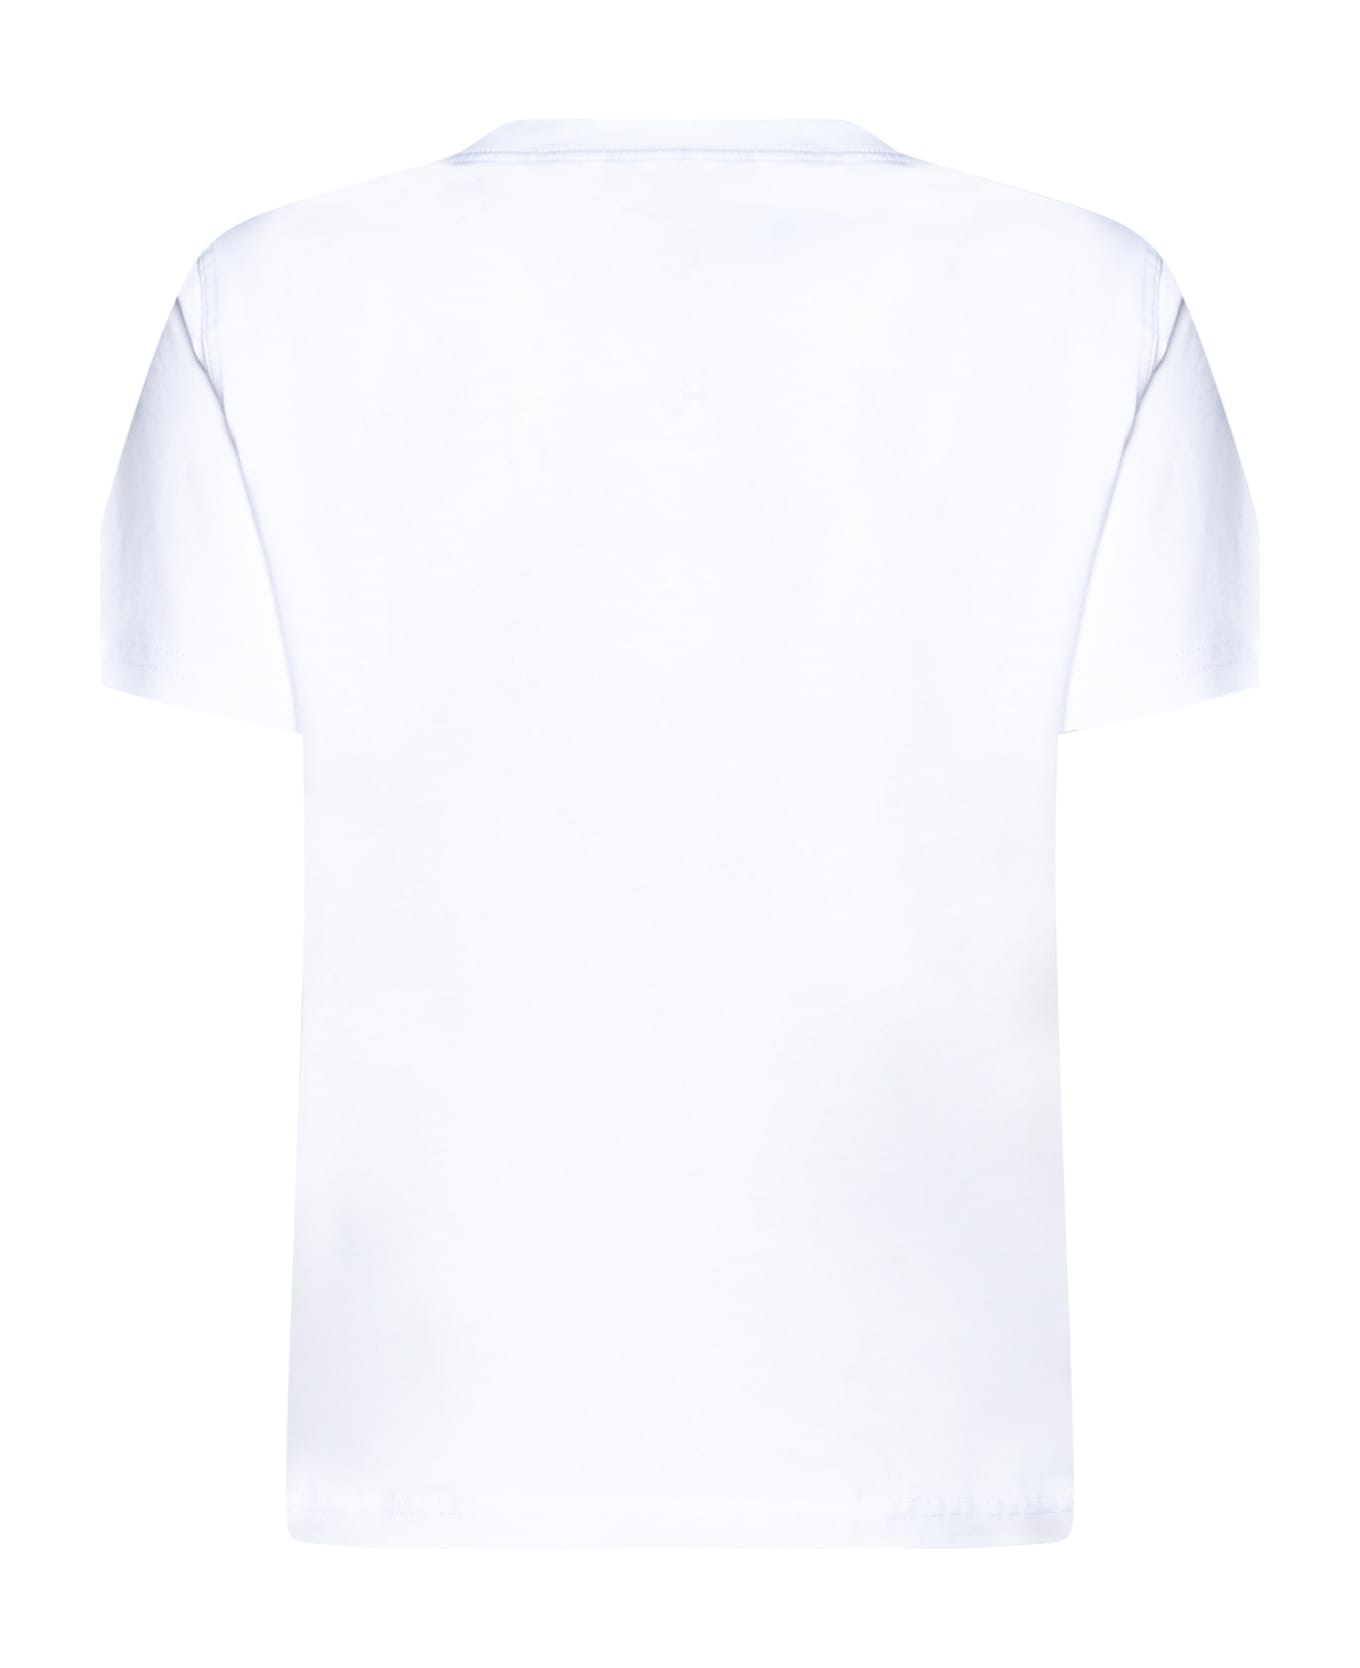 Versace Jeans Couture T-shirt - White/gold